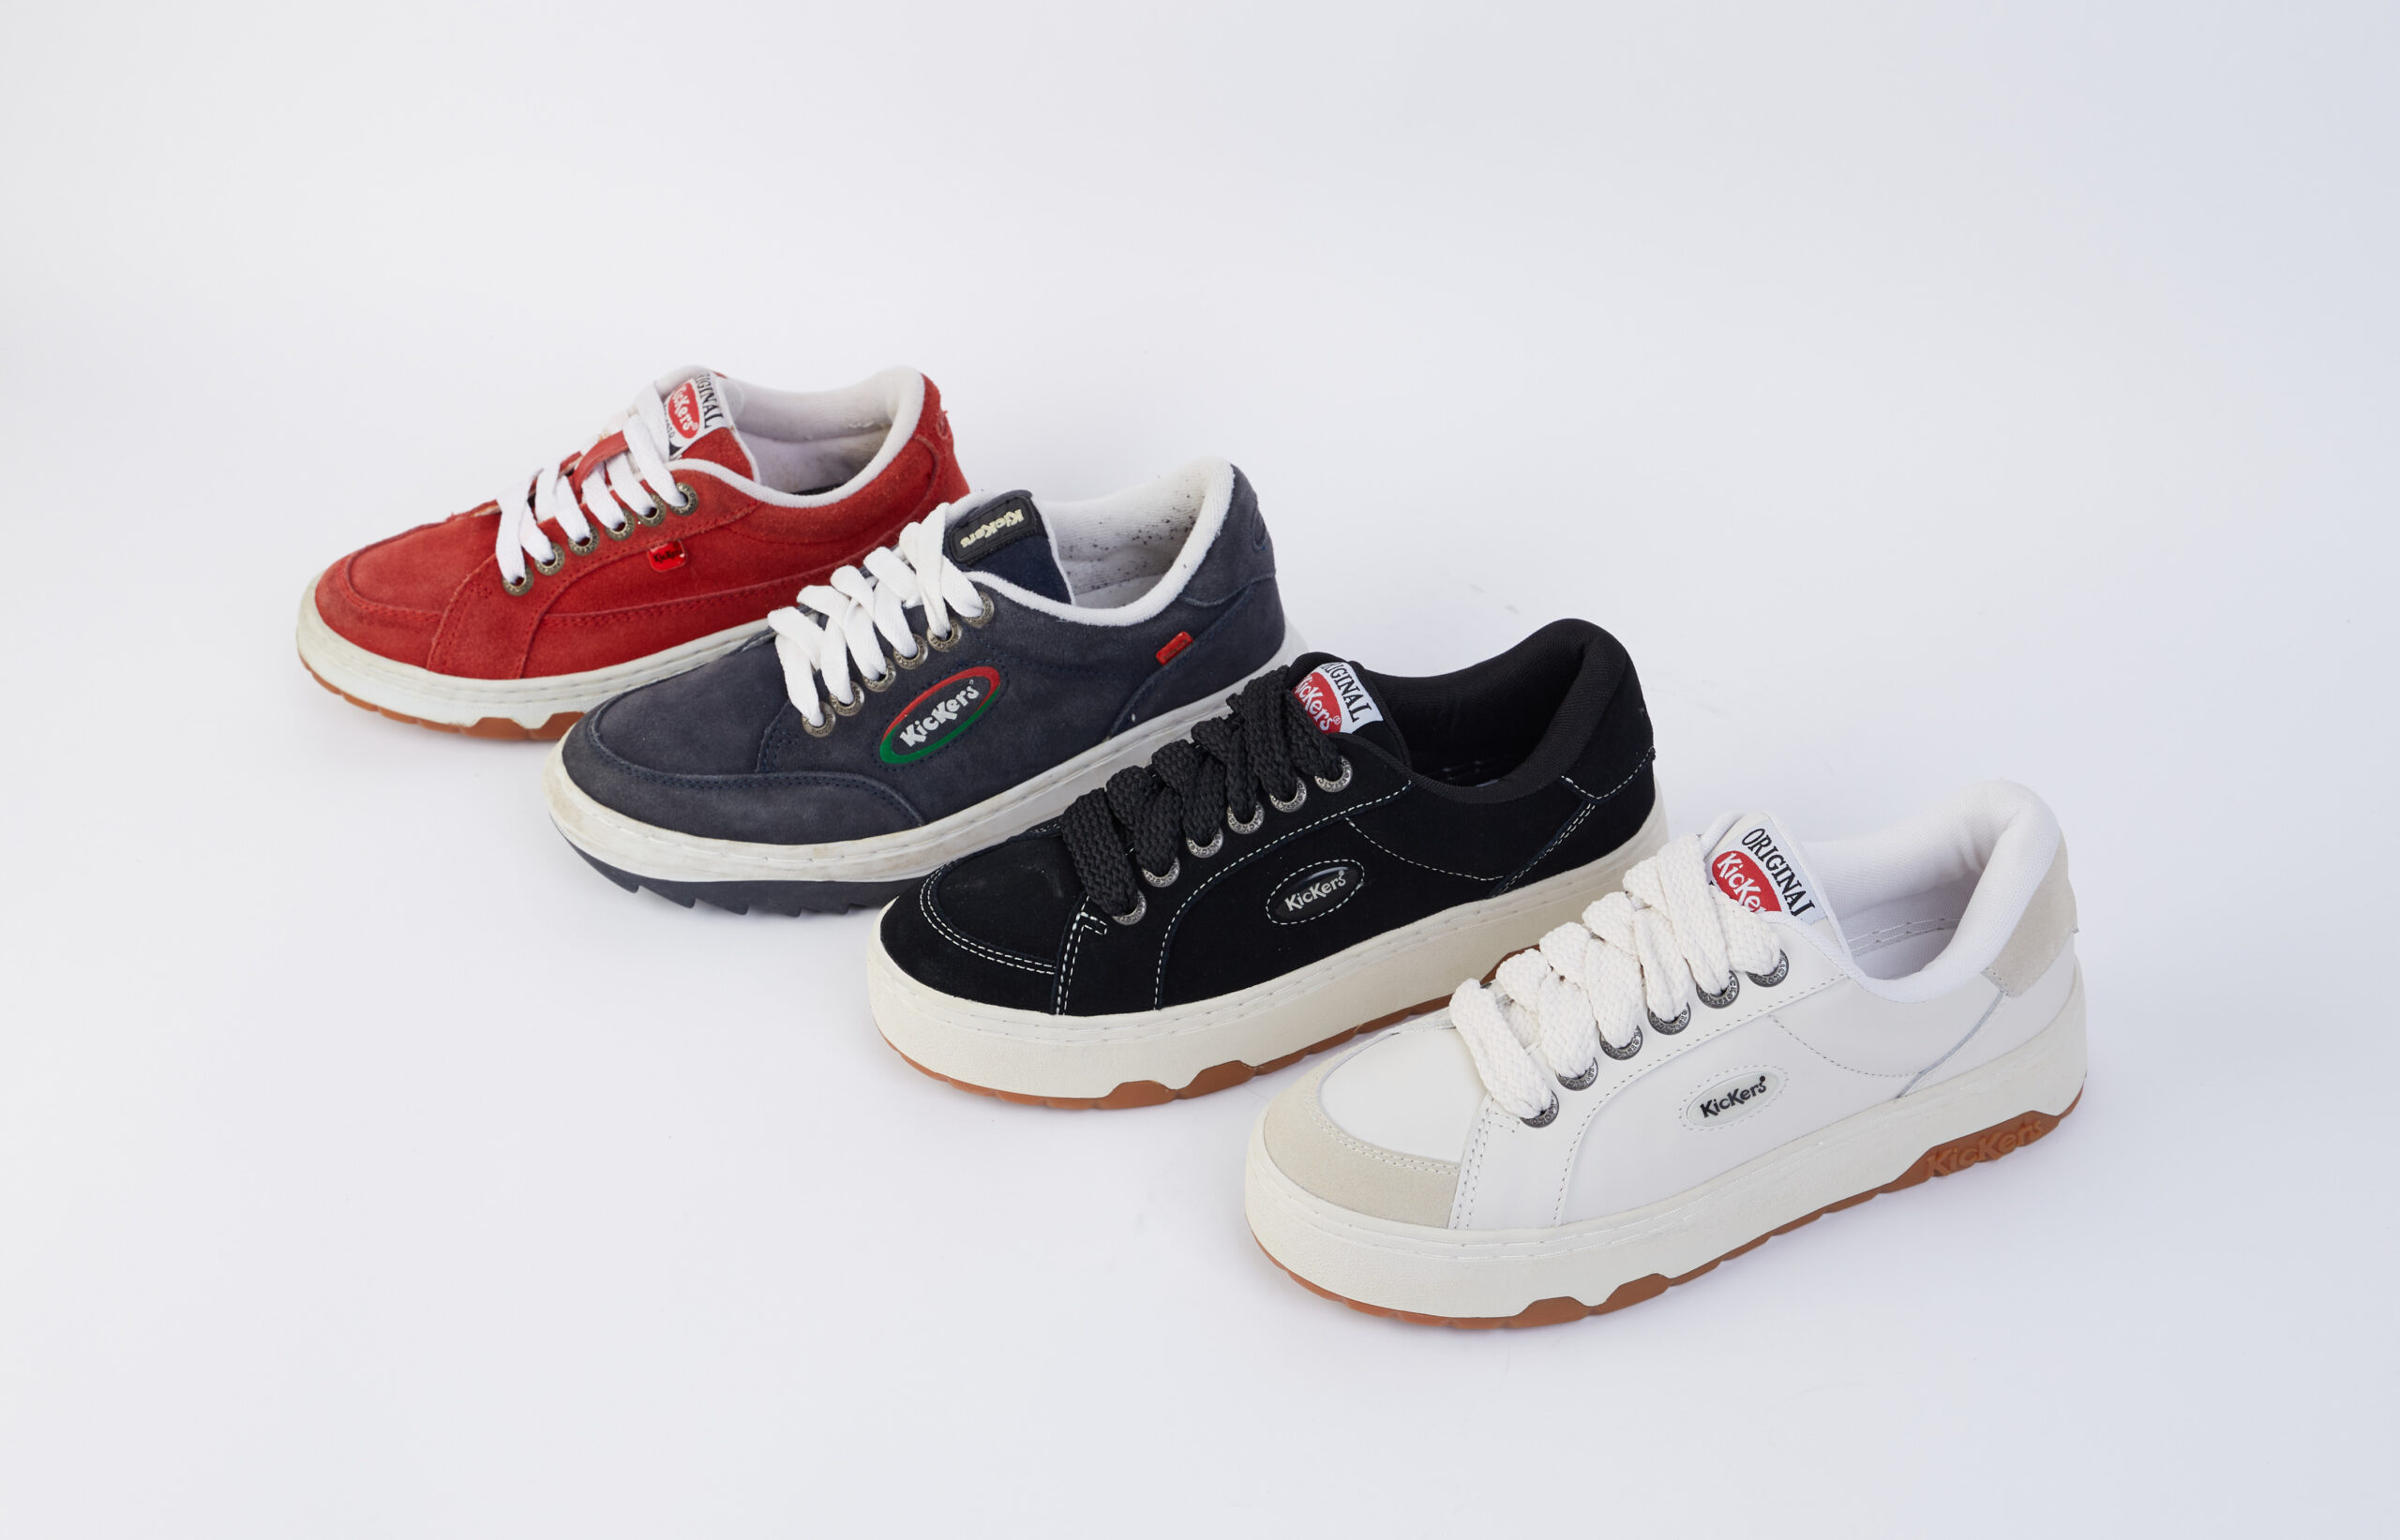 Kickers unveils retro-inspired 70 Lo trainer, with a modern twist